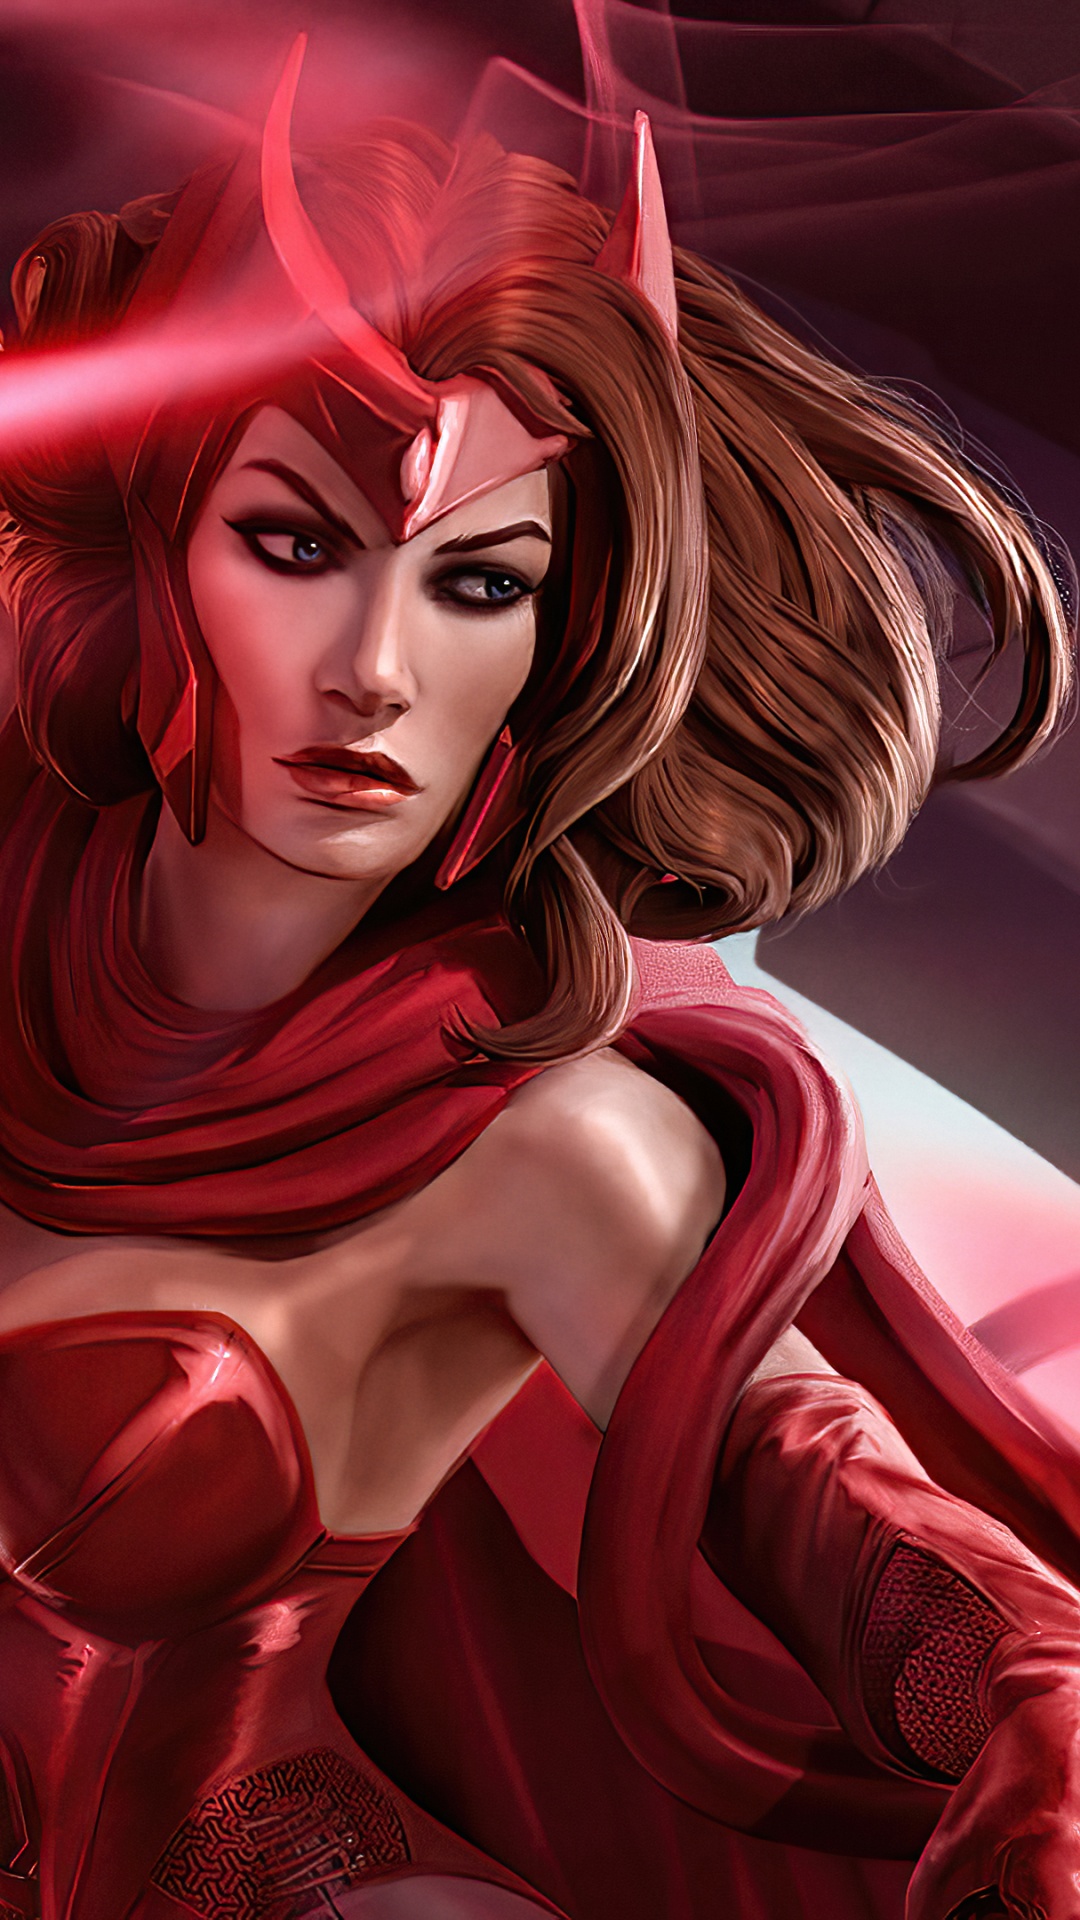 Scarlet Witch, Marvel Scarlet Witch Art, Wanda Maximoff, Hulk, Vision. Wallpaper in 1080x1920 Resolution